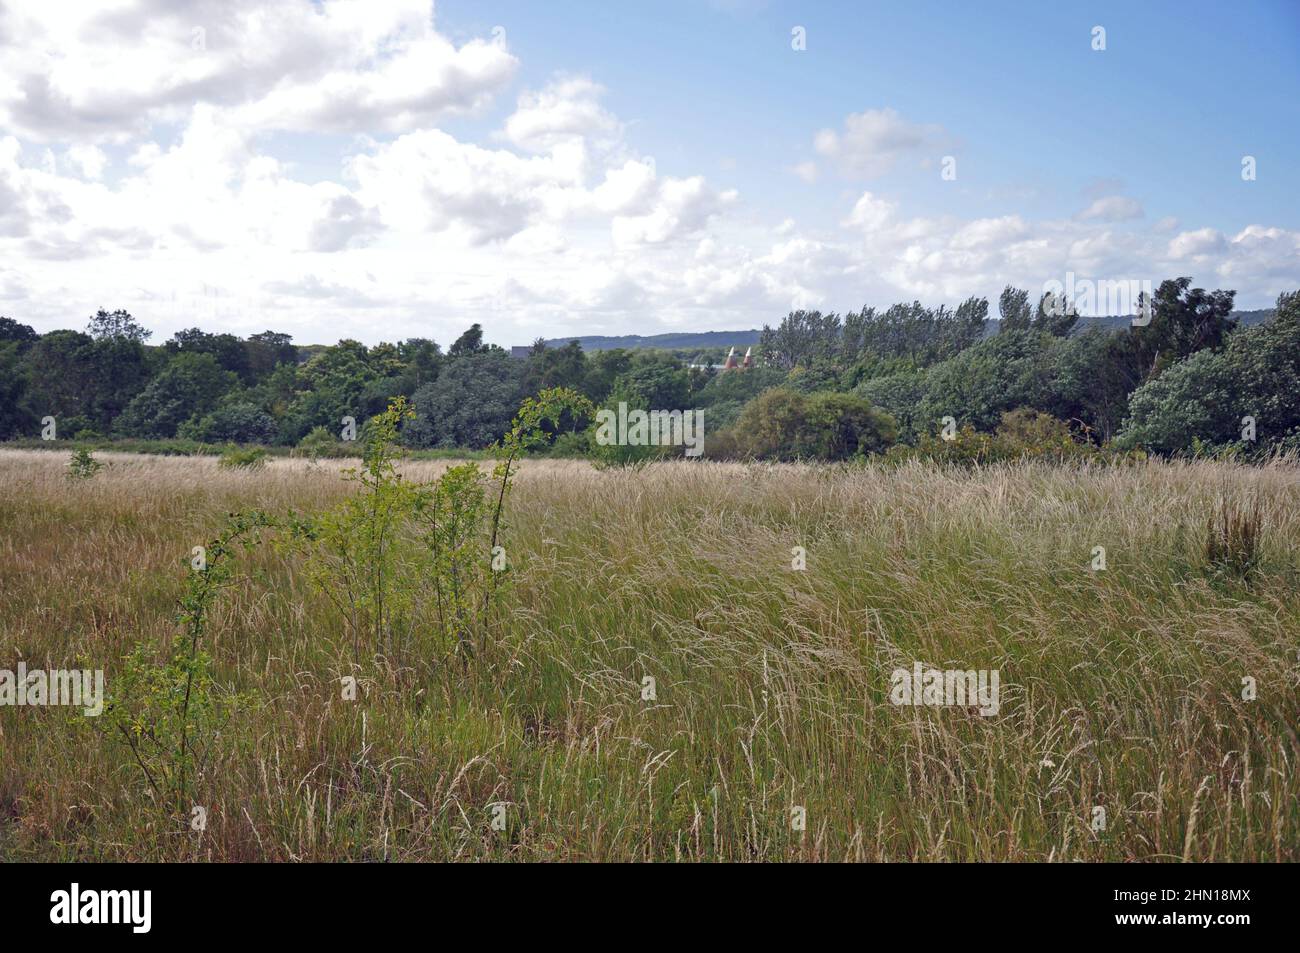 Fields of grass and plants with blue sky and clouds with trees in background. Taken in Maidstone, Kent, United Kingdom. Stock Photo